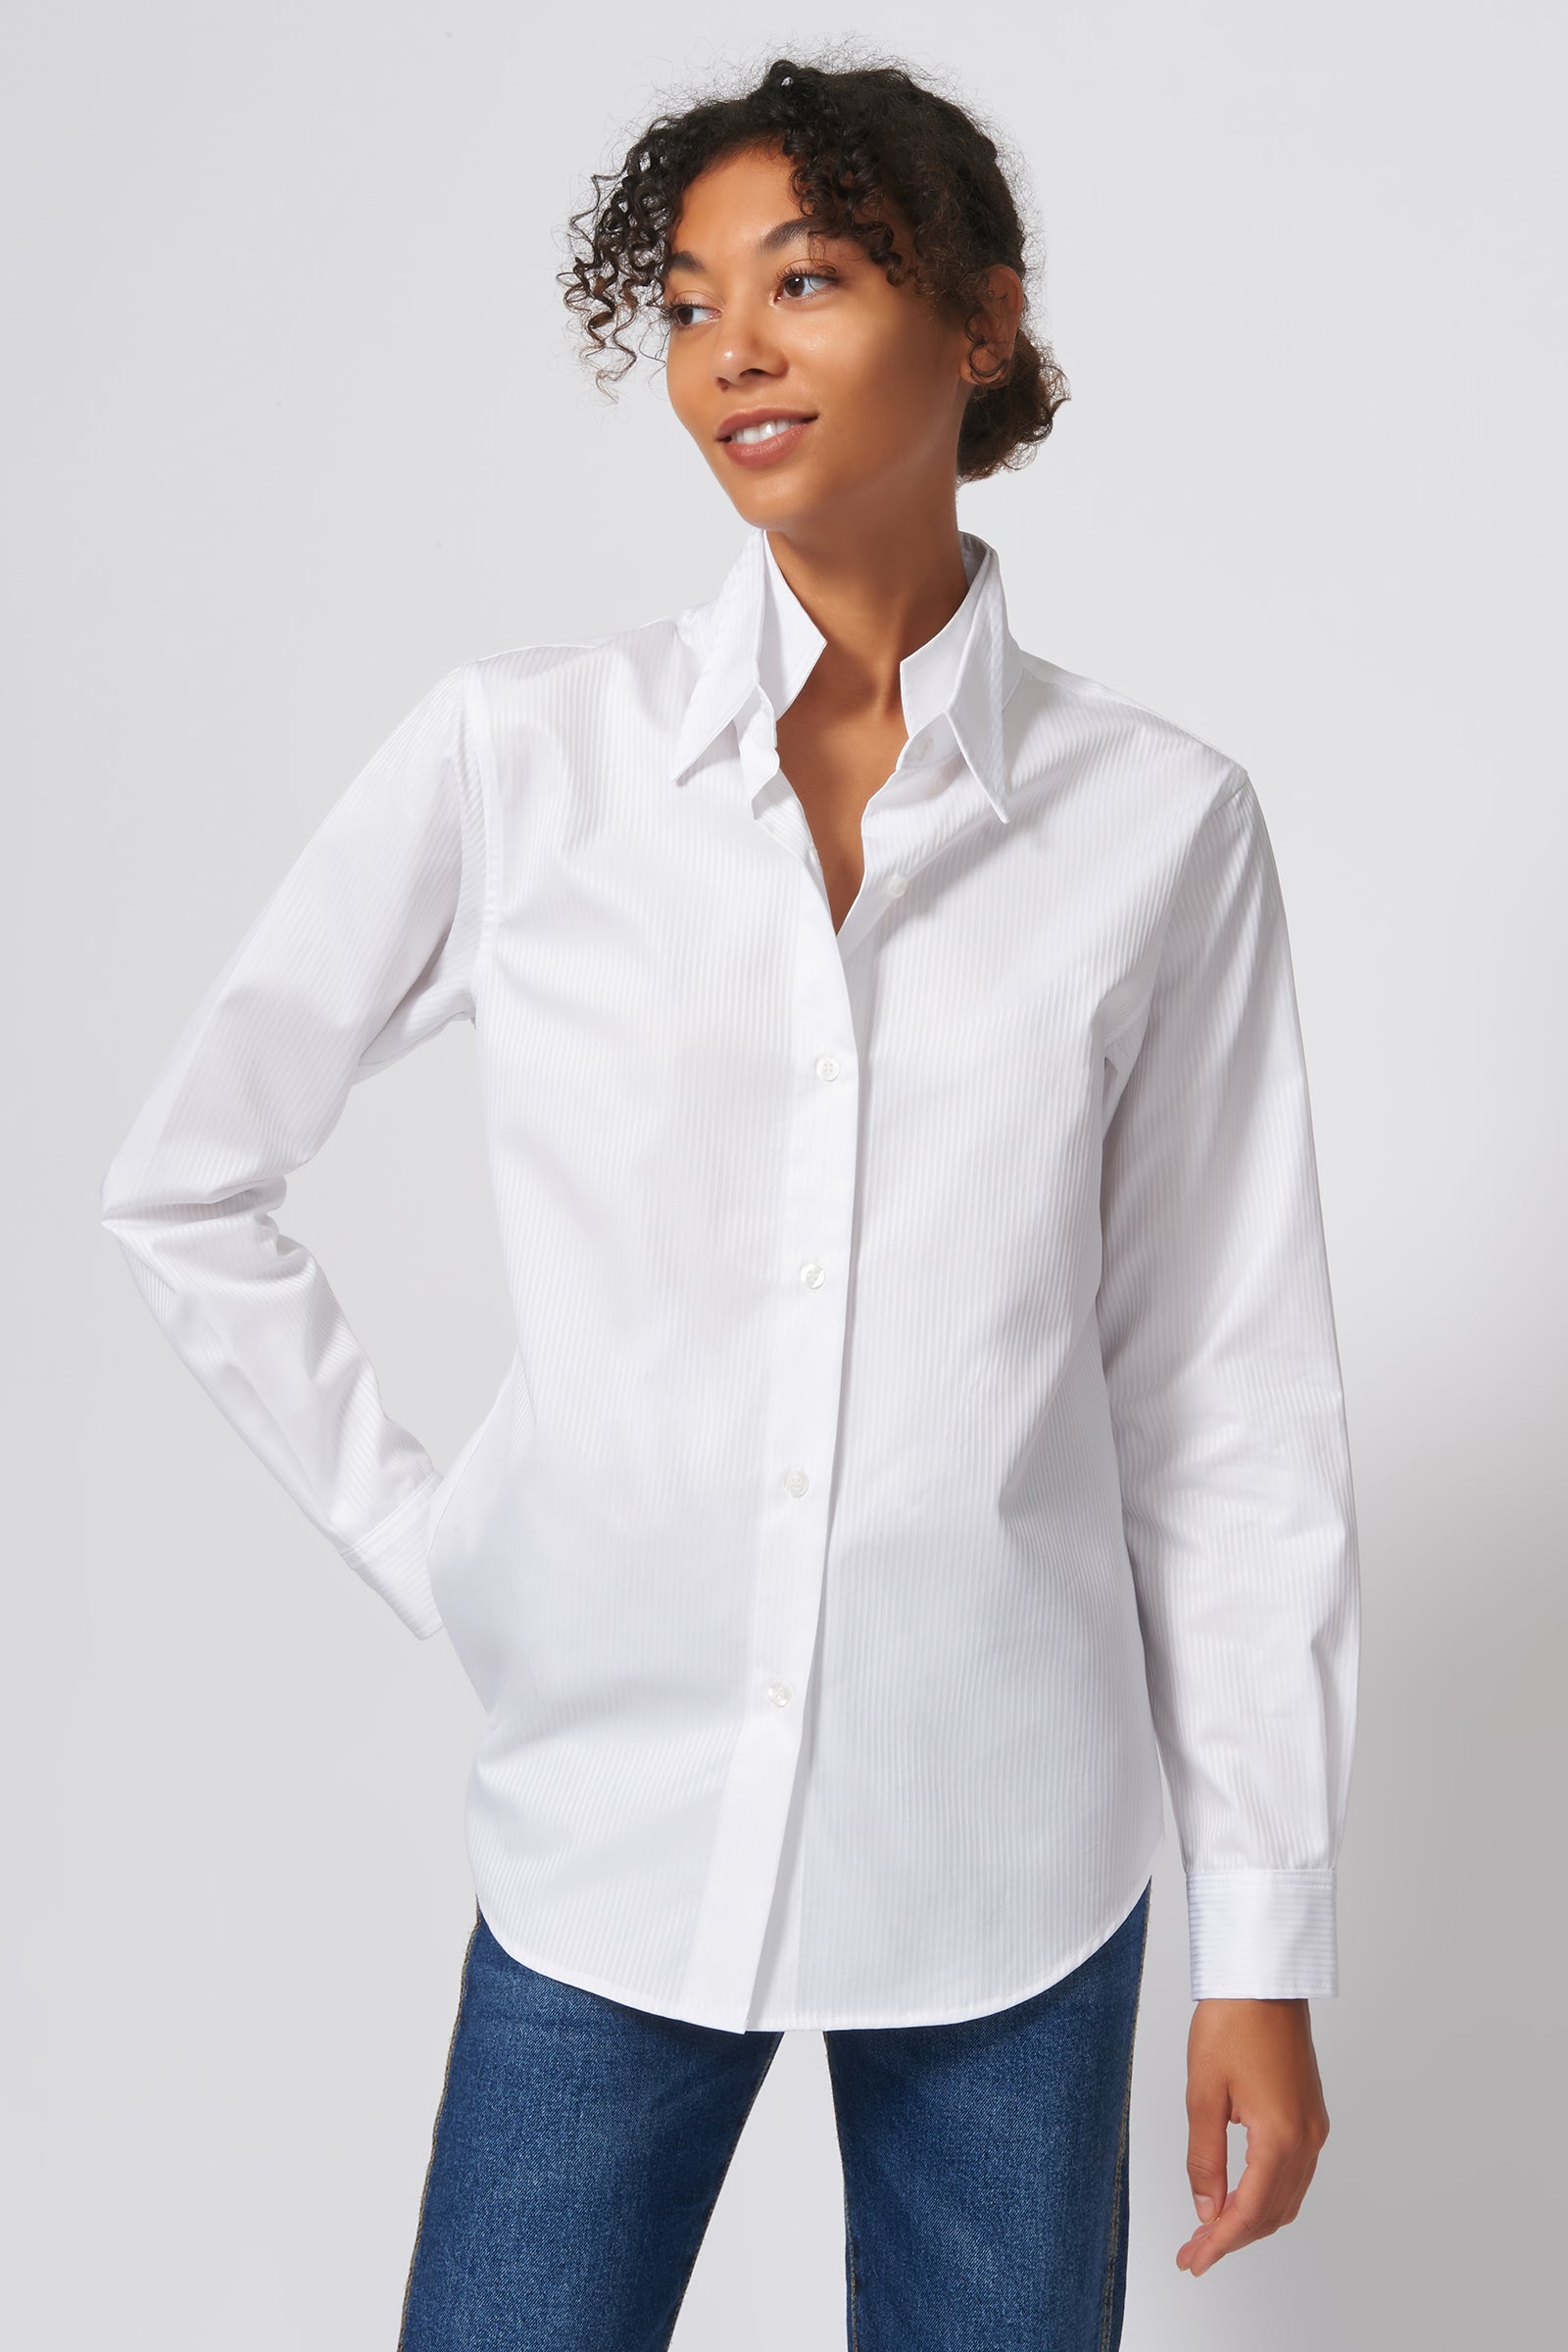 Double Collar Shirt In White Satin Stripe Made From 100 Cotton Kal Rieman